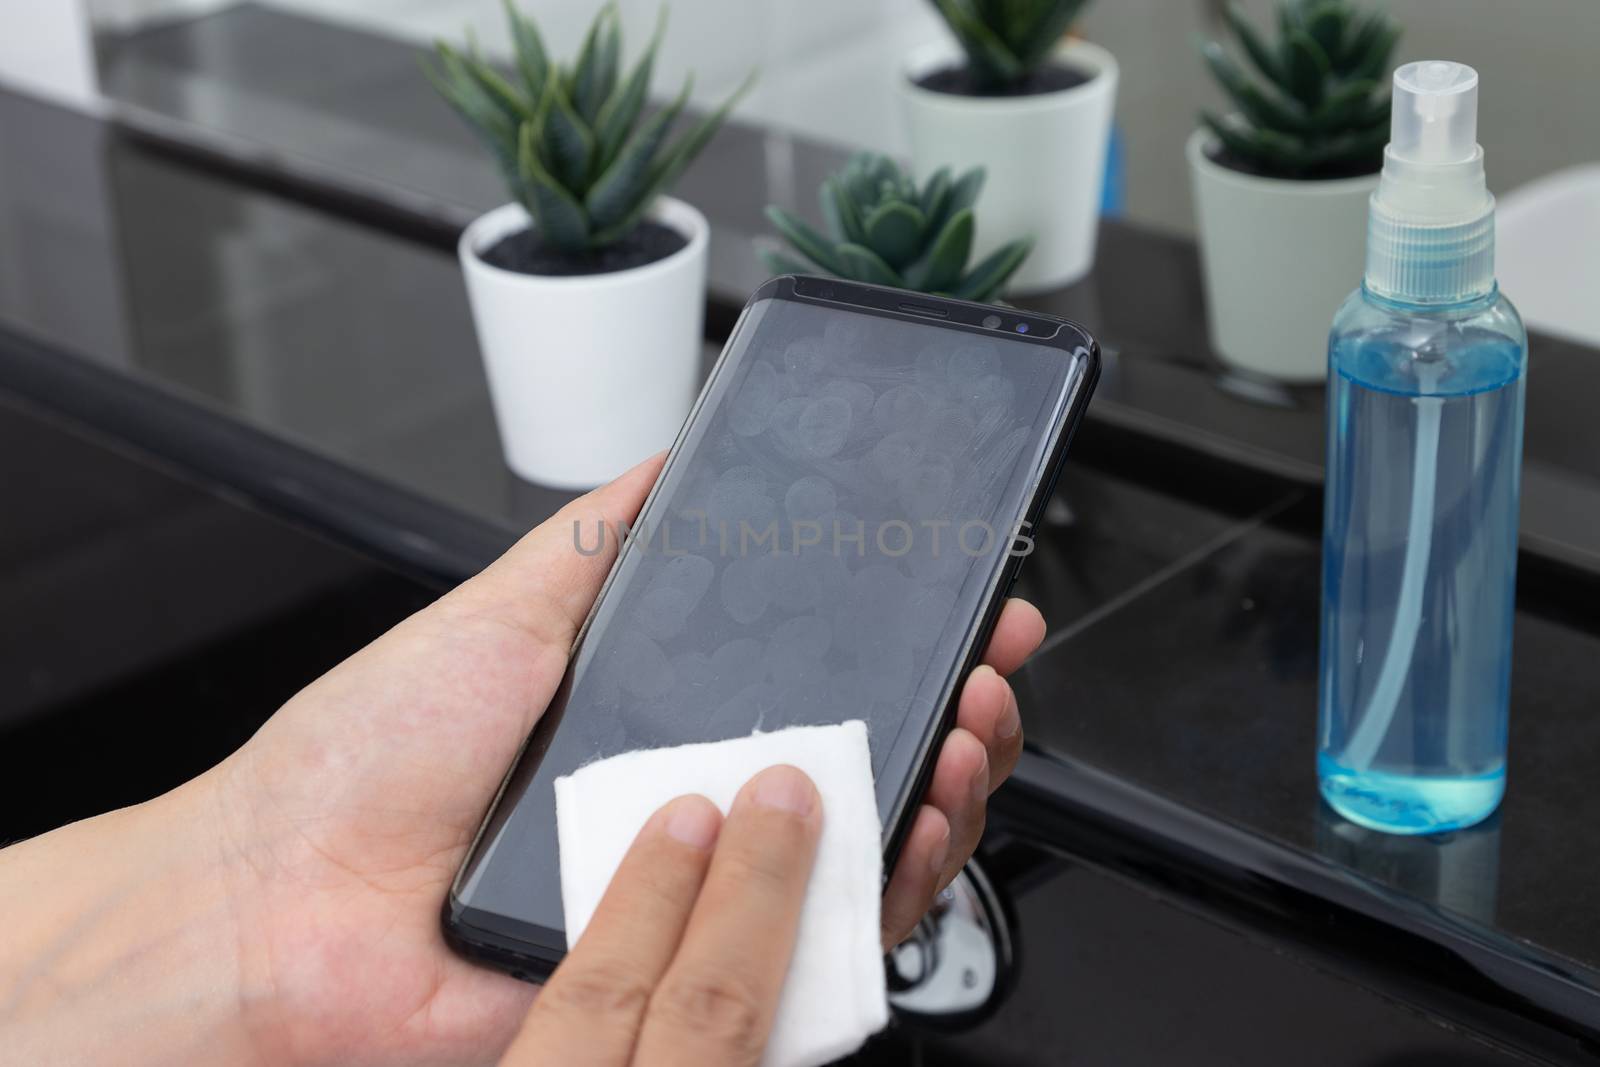 disinfect, sanitize, hygiene care. cleaning fingerprint on mobile phone touch screen for disinfection, prevention of germs spreading during infections of COVID-19 coronavirus